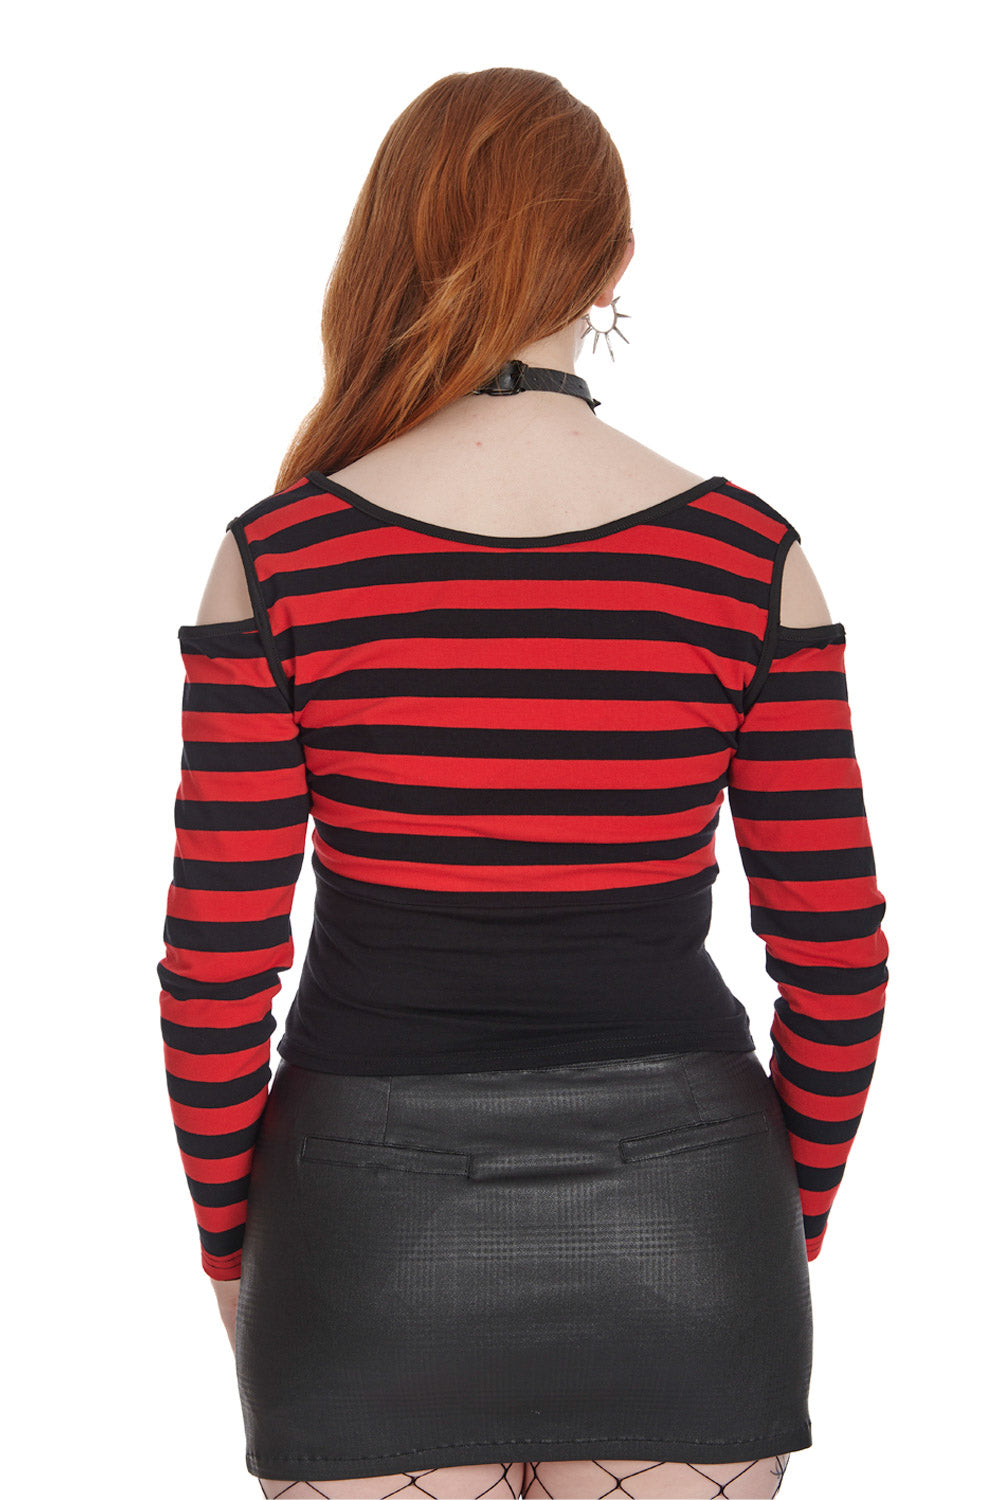 Banned Rebel Chic Striped Top - Kate's Clothing